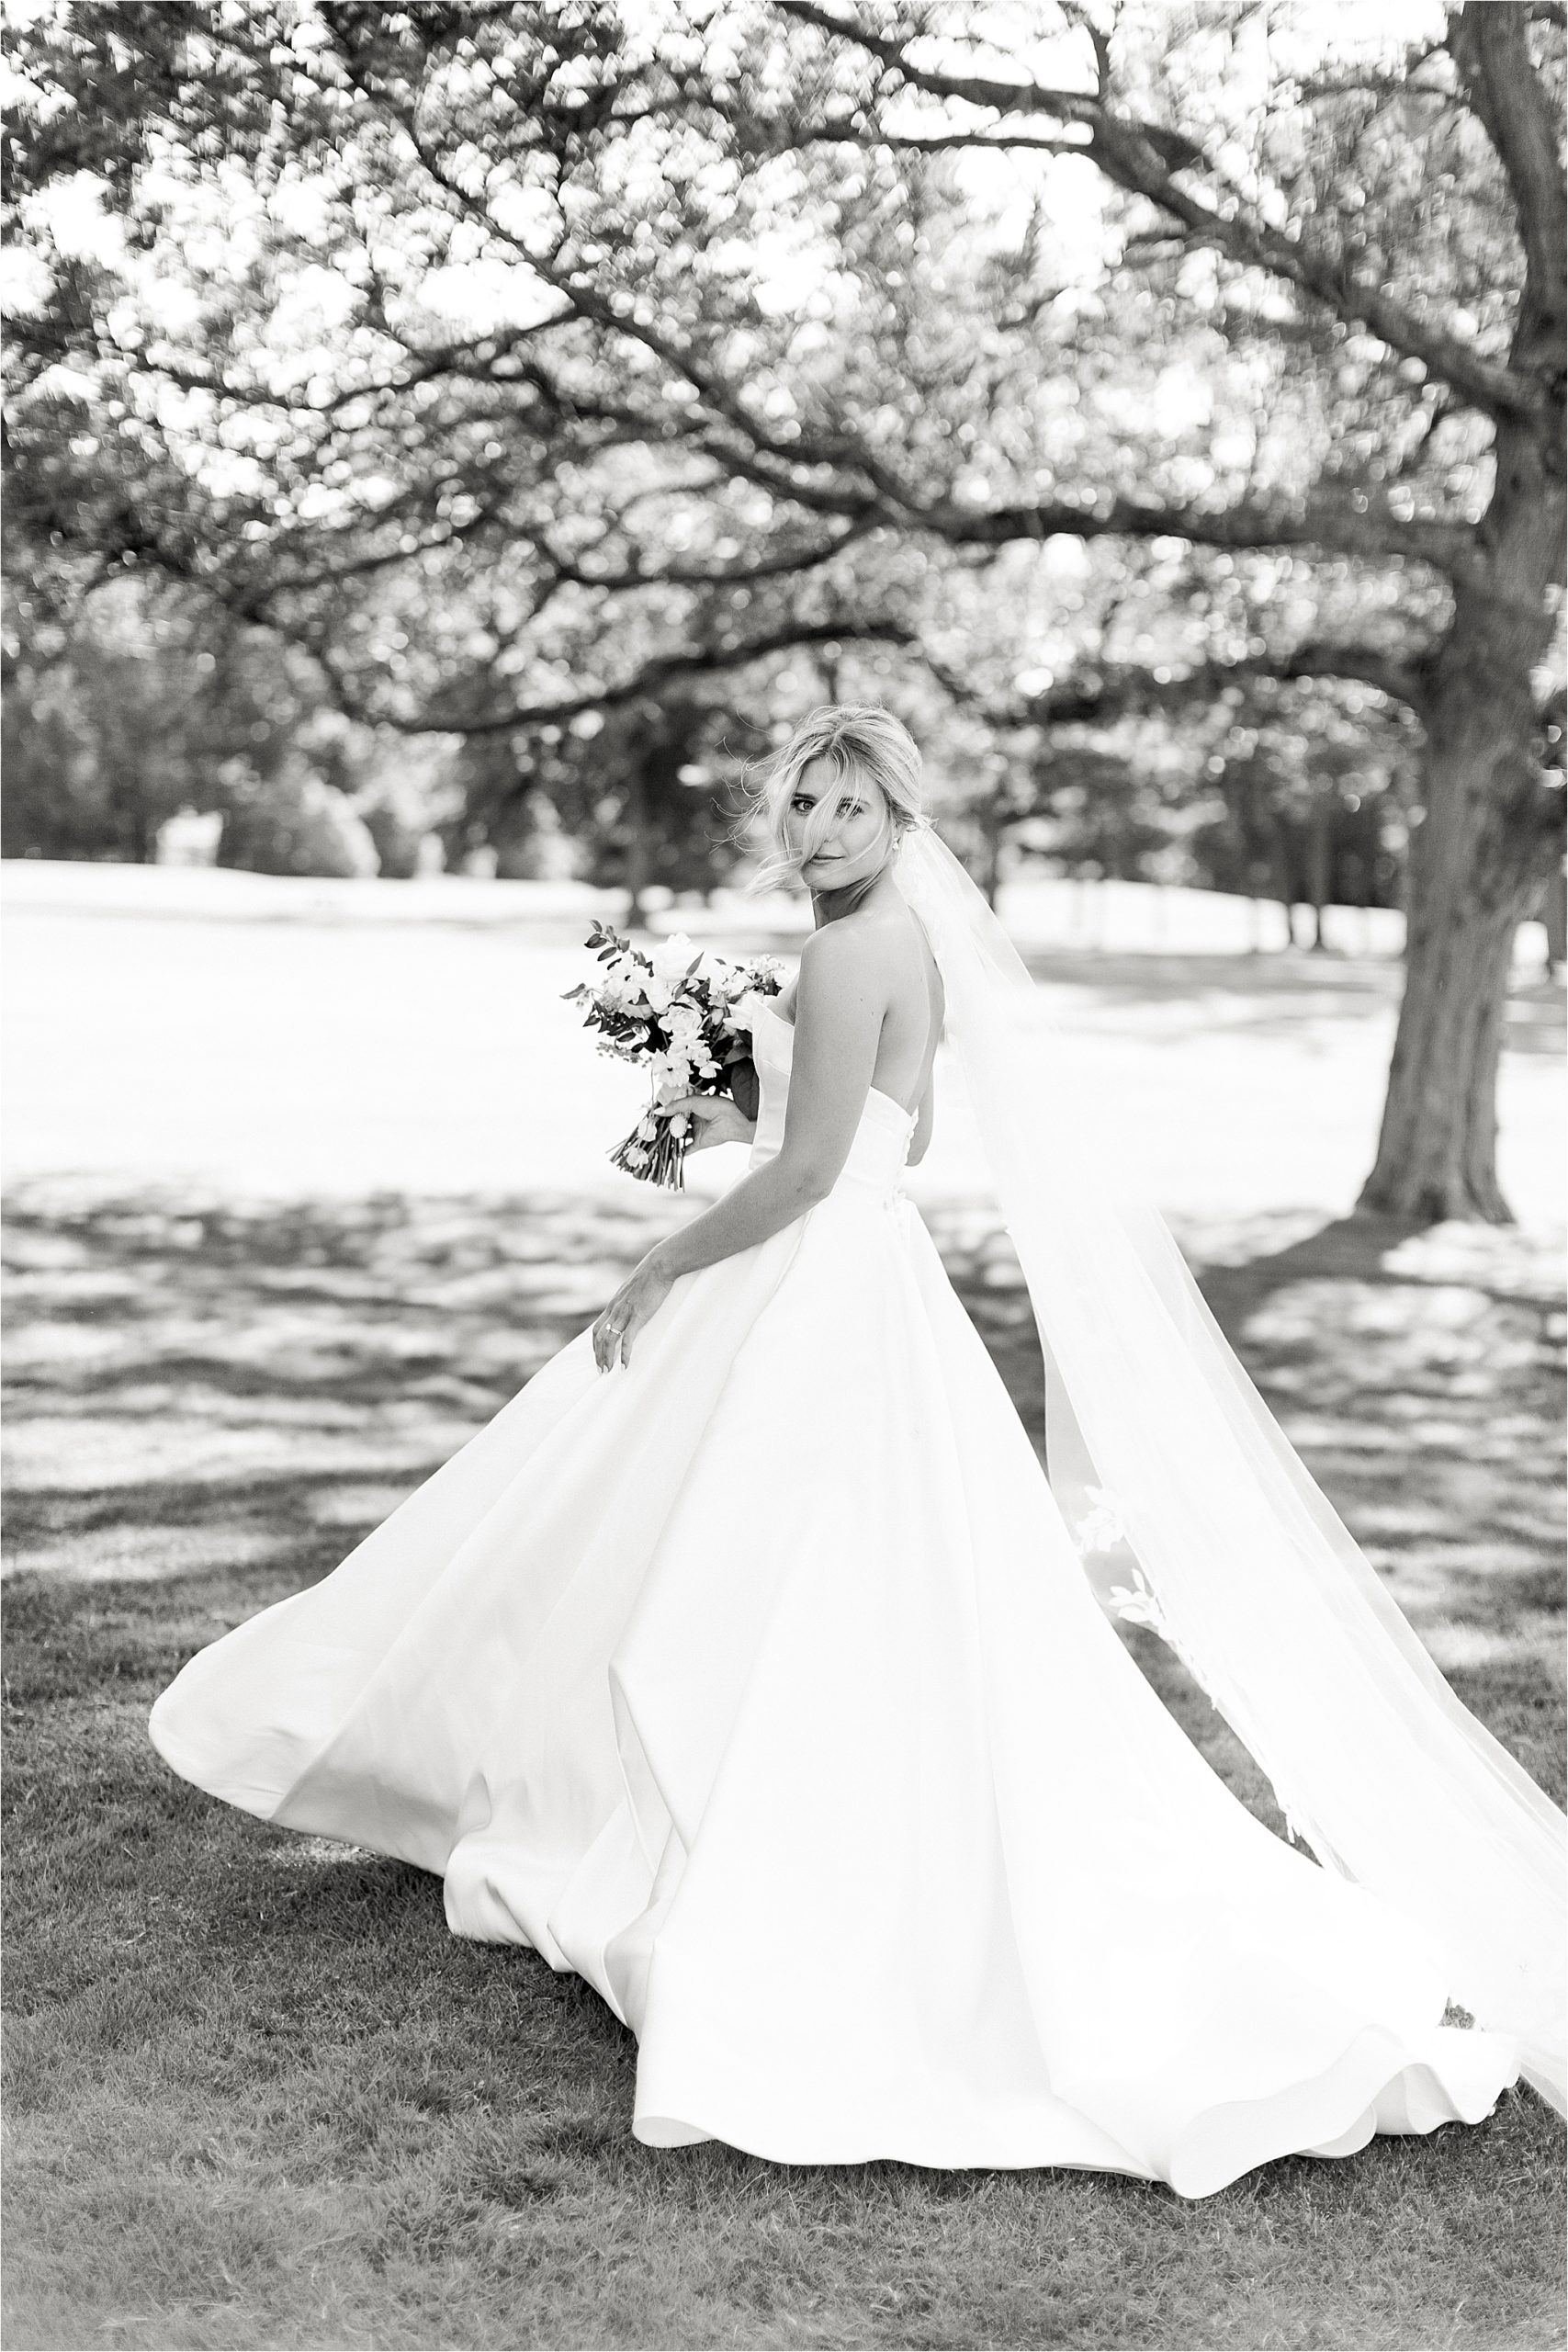 Bride in Anne Barge dress by Cleveland Wedding photographers